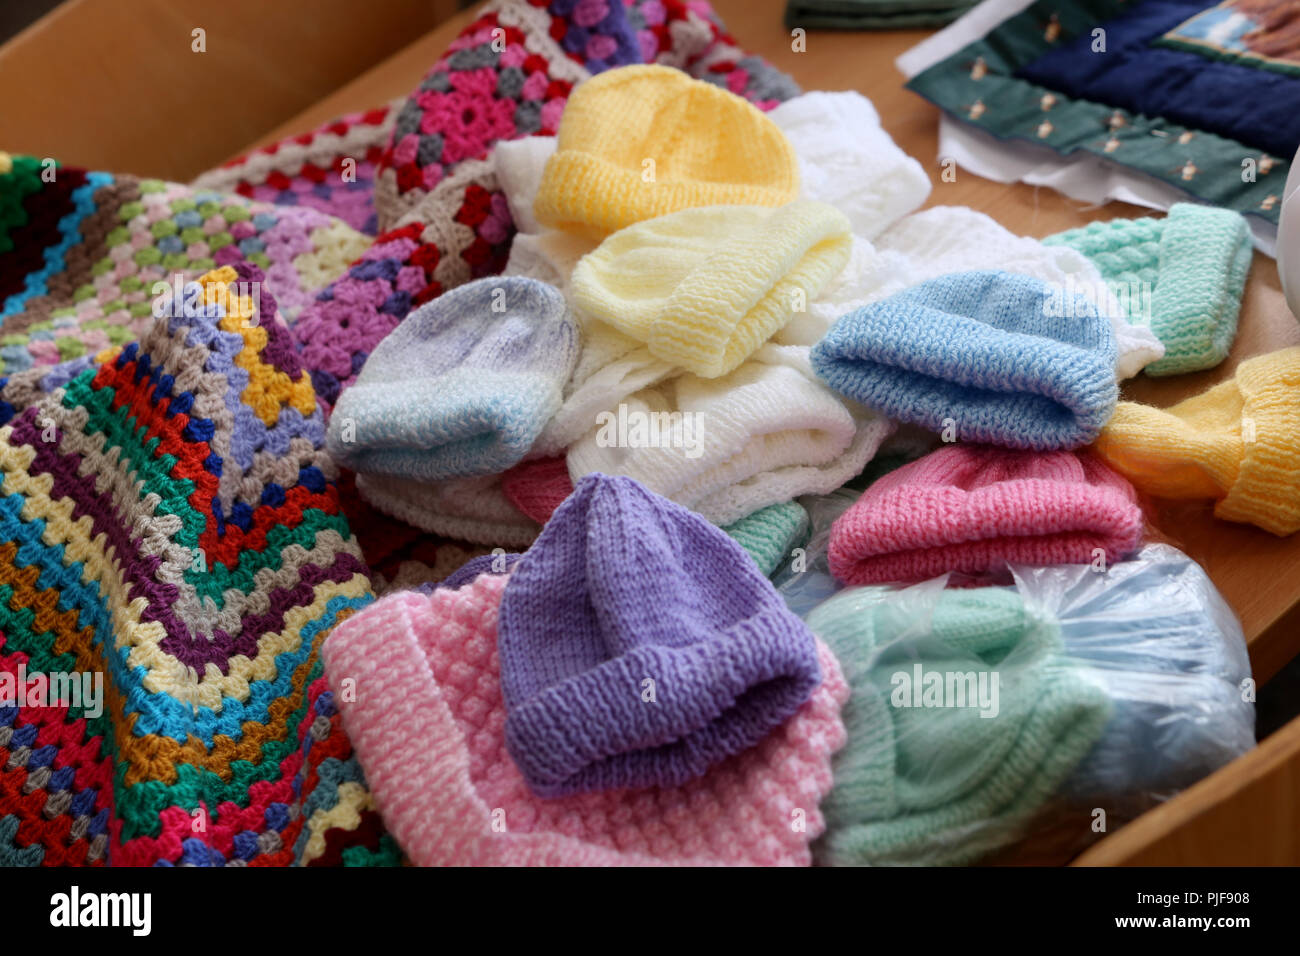 General views of Knitted babies hats, clothing and blankets in an old peoples home in Bognor Regis, West Sussex, UK. Stock Photo